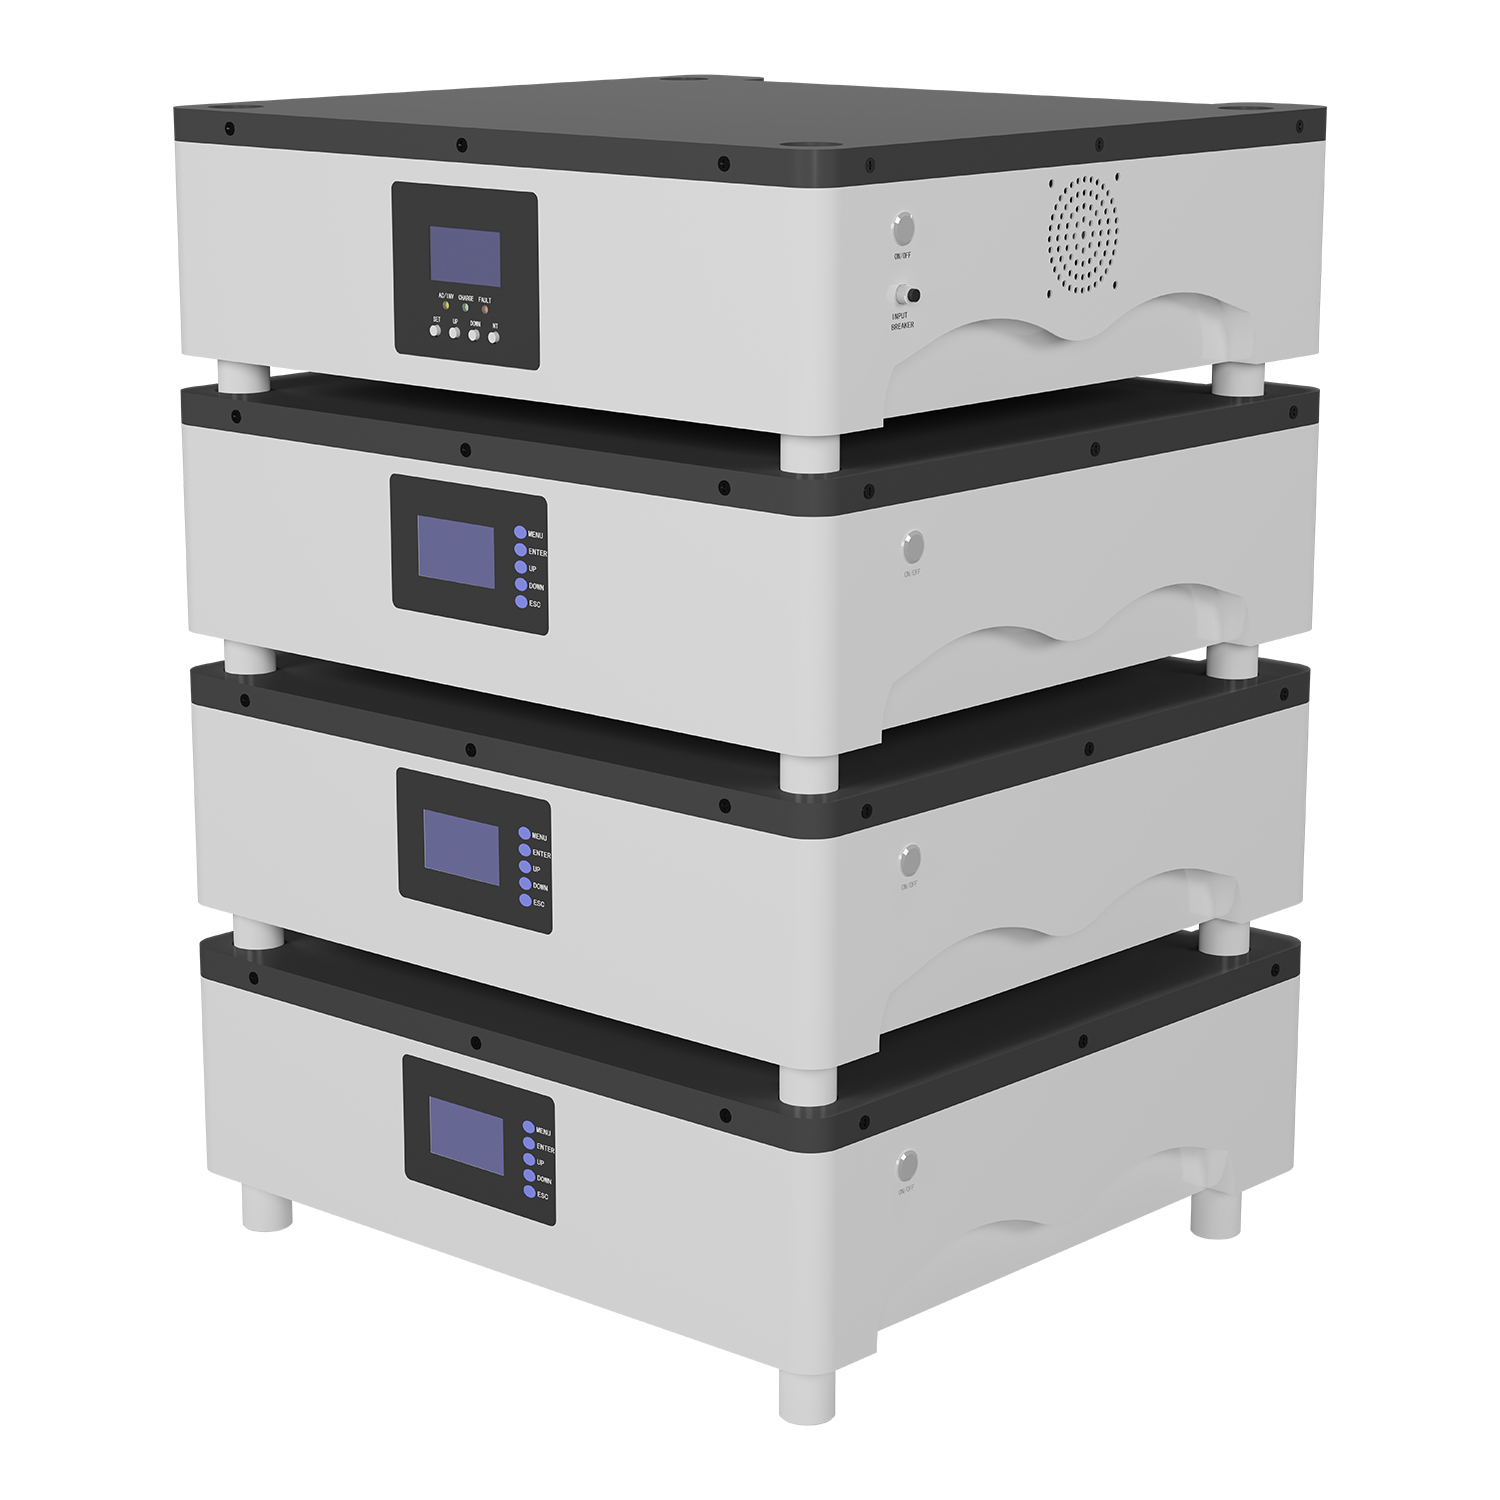 M-BOX1-All-in-one Off Grid ESS System 5KW Inverter LFP Battery Module Flexible Combination